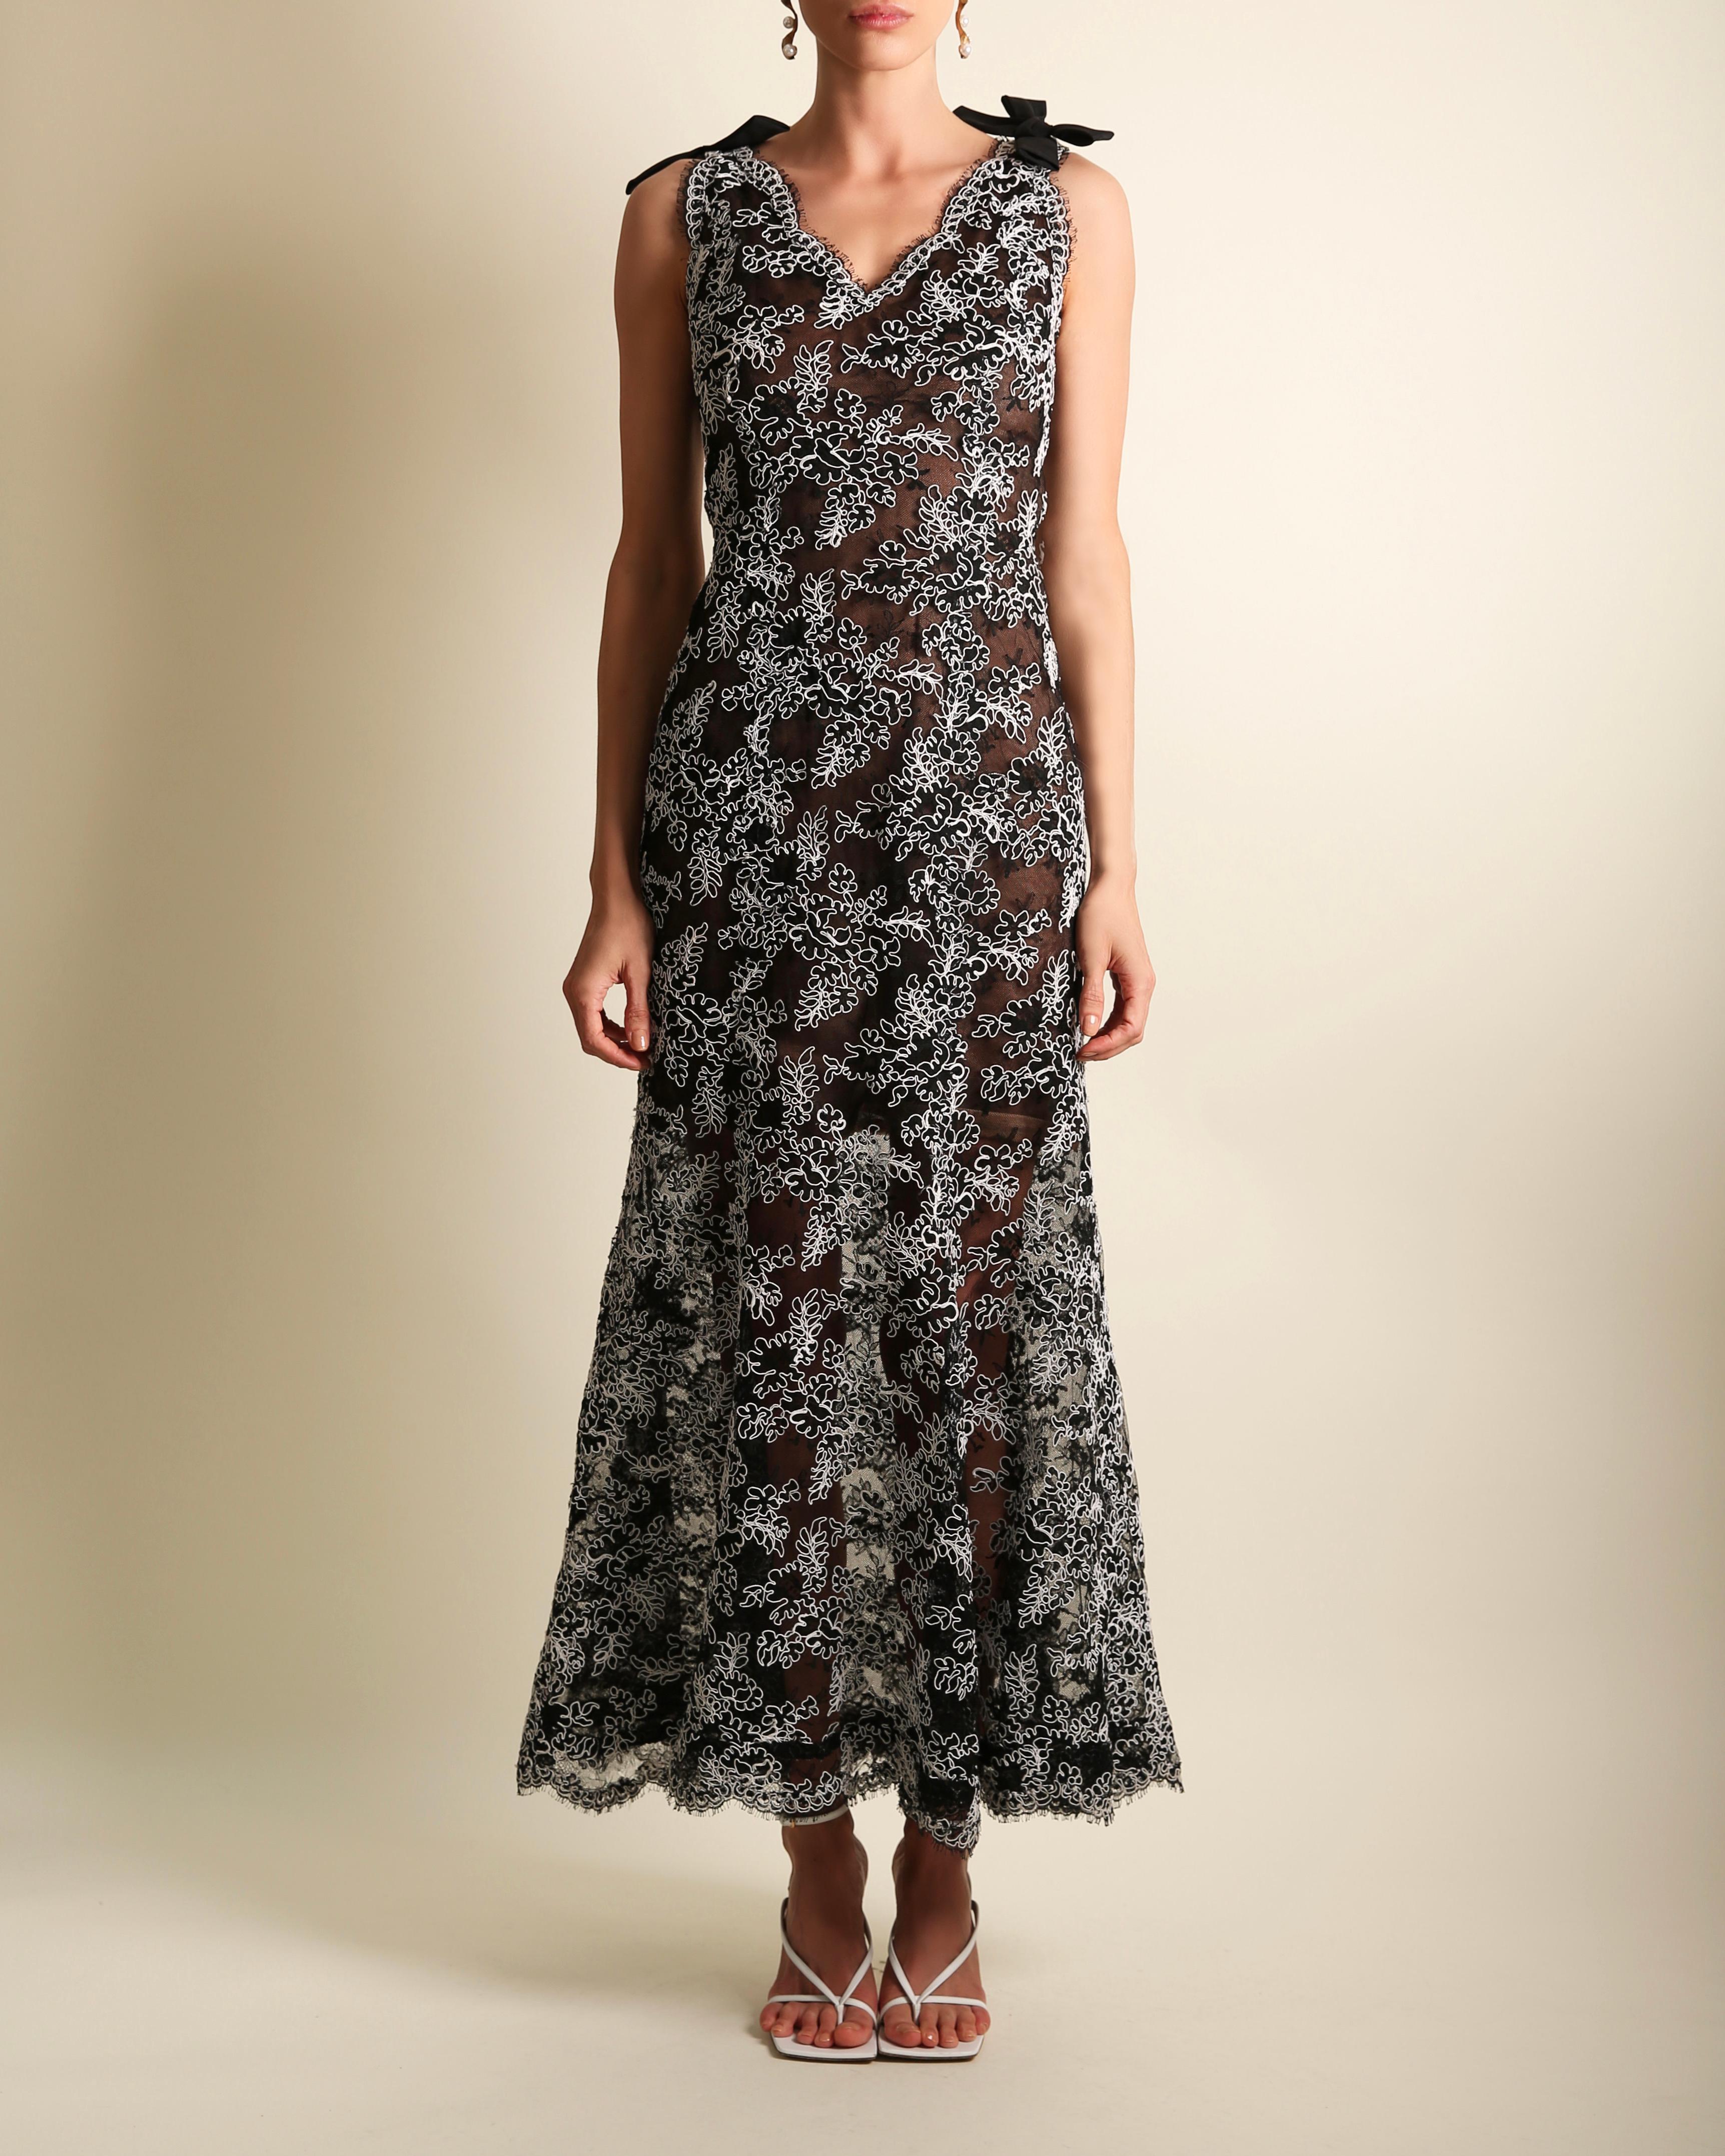 Oscar de la Renta vintage gown
A line cut which consists of a fitted upper and flared skirt 
Black netting with black lace overlay detail with white embroidered floral style detail
Two large black bows to both of the shoulders
Concealed side zip,